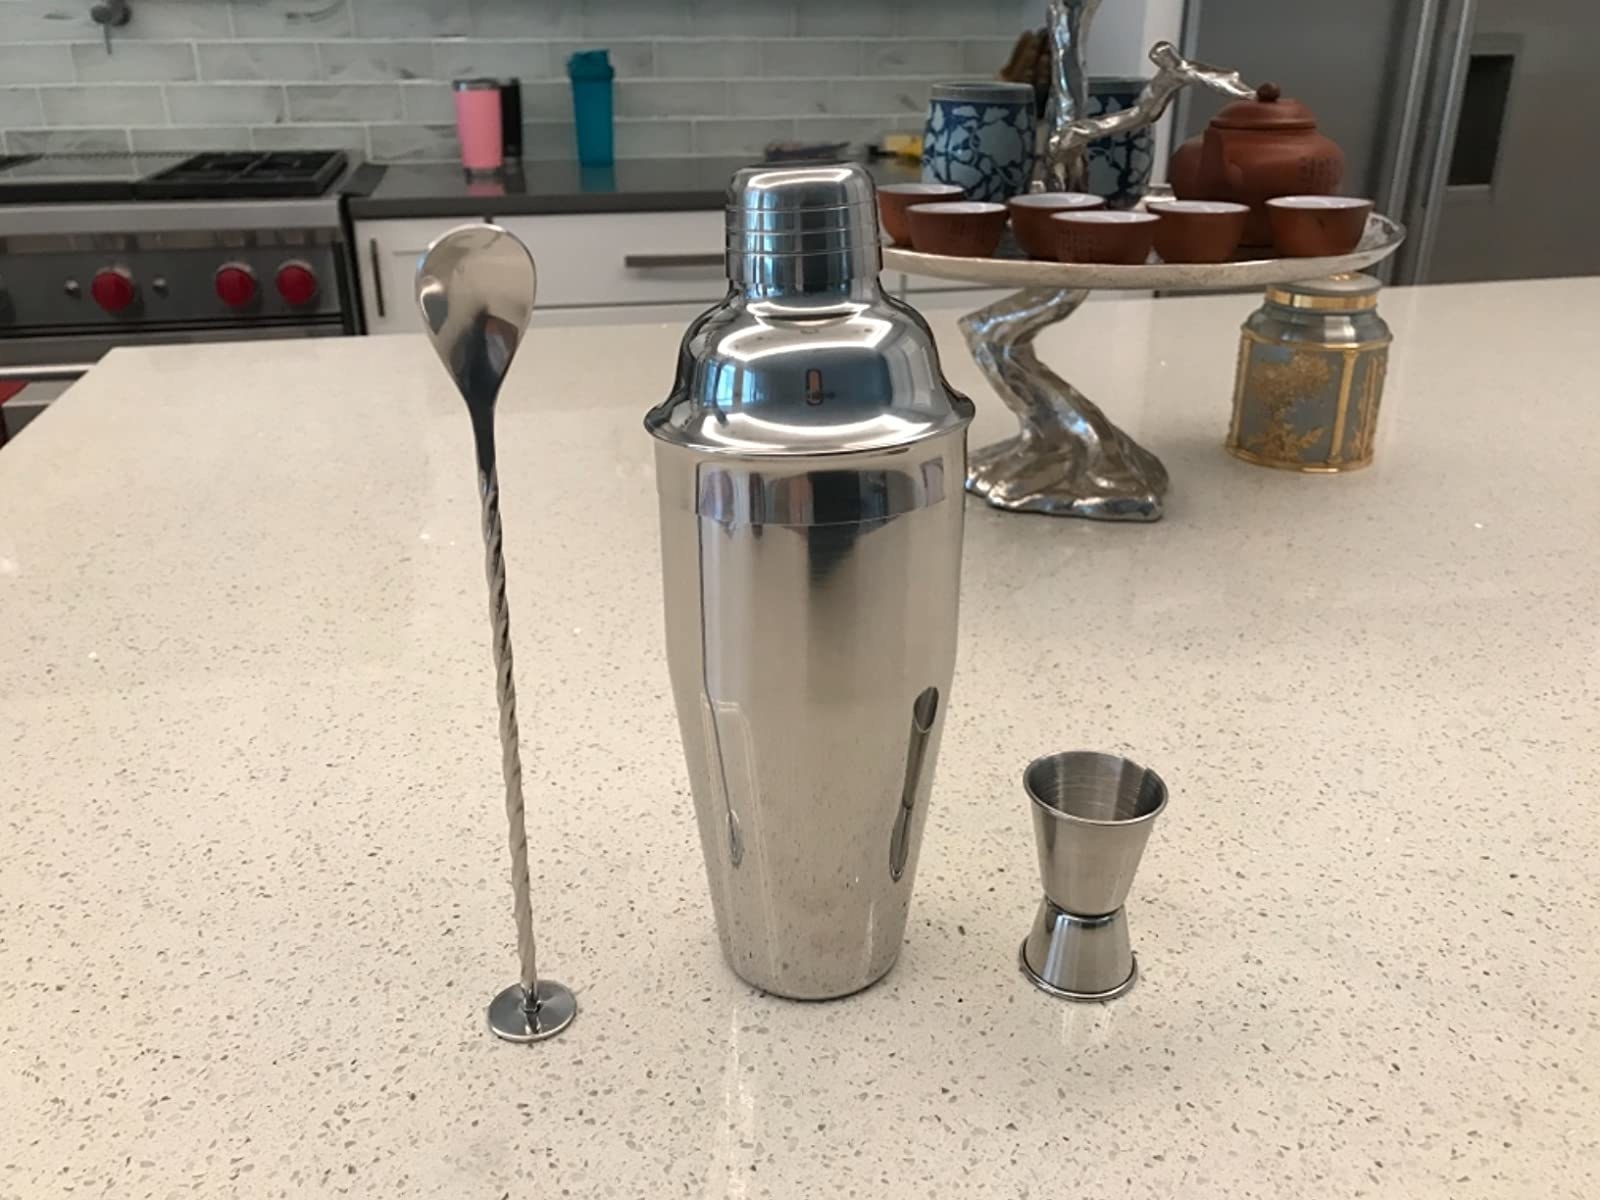 the silver cocktail shaker with lid, spoon, and measuring cup